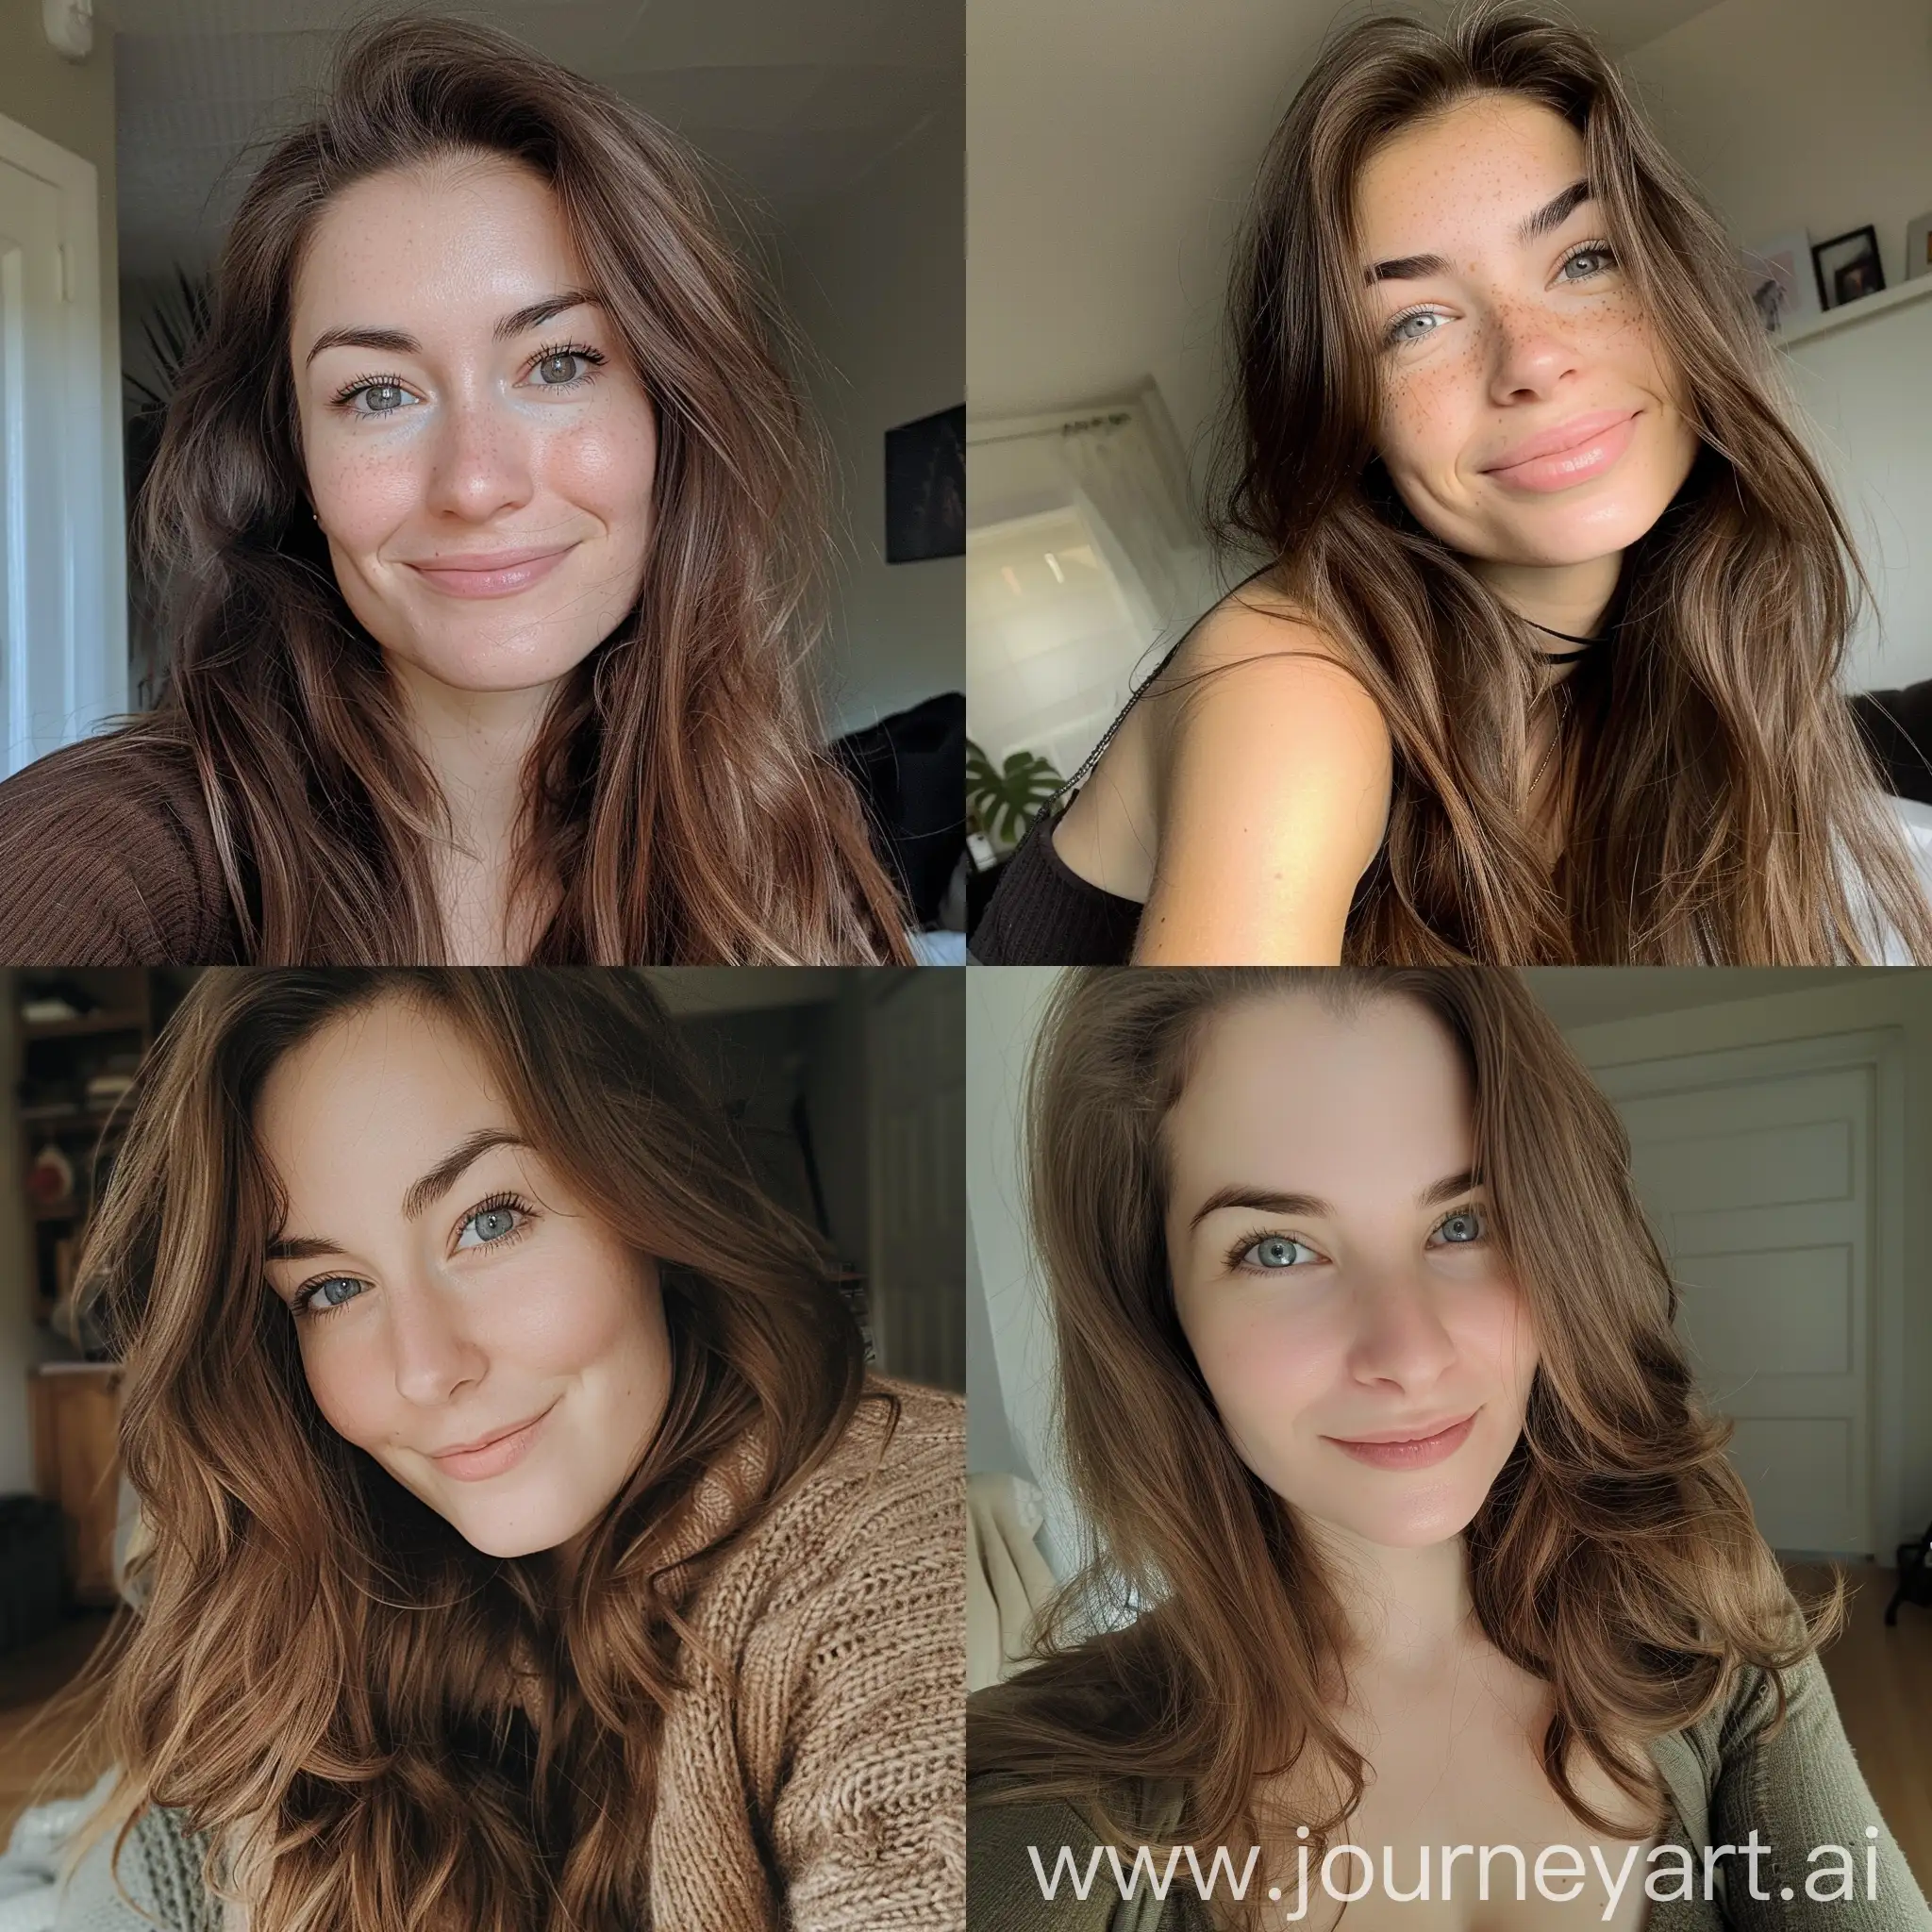 Interior selfies of a woman with brown-haired woman with long hair, gray eyes and an attractive smile, taken on a low quality camera phone